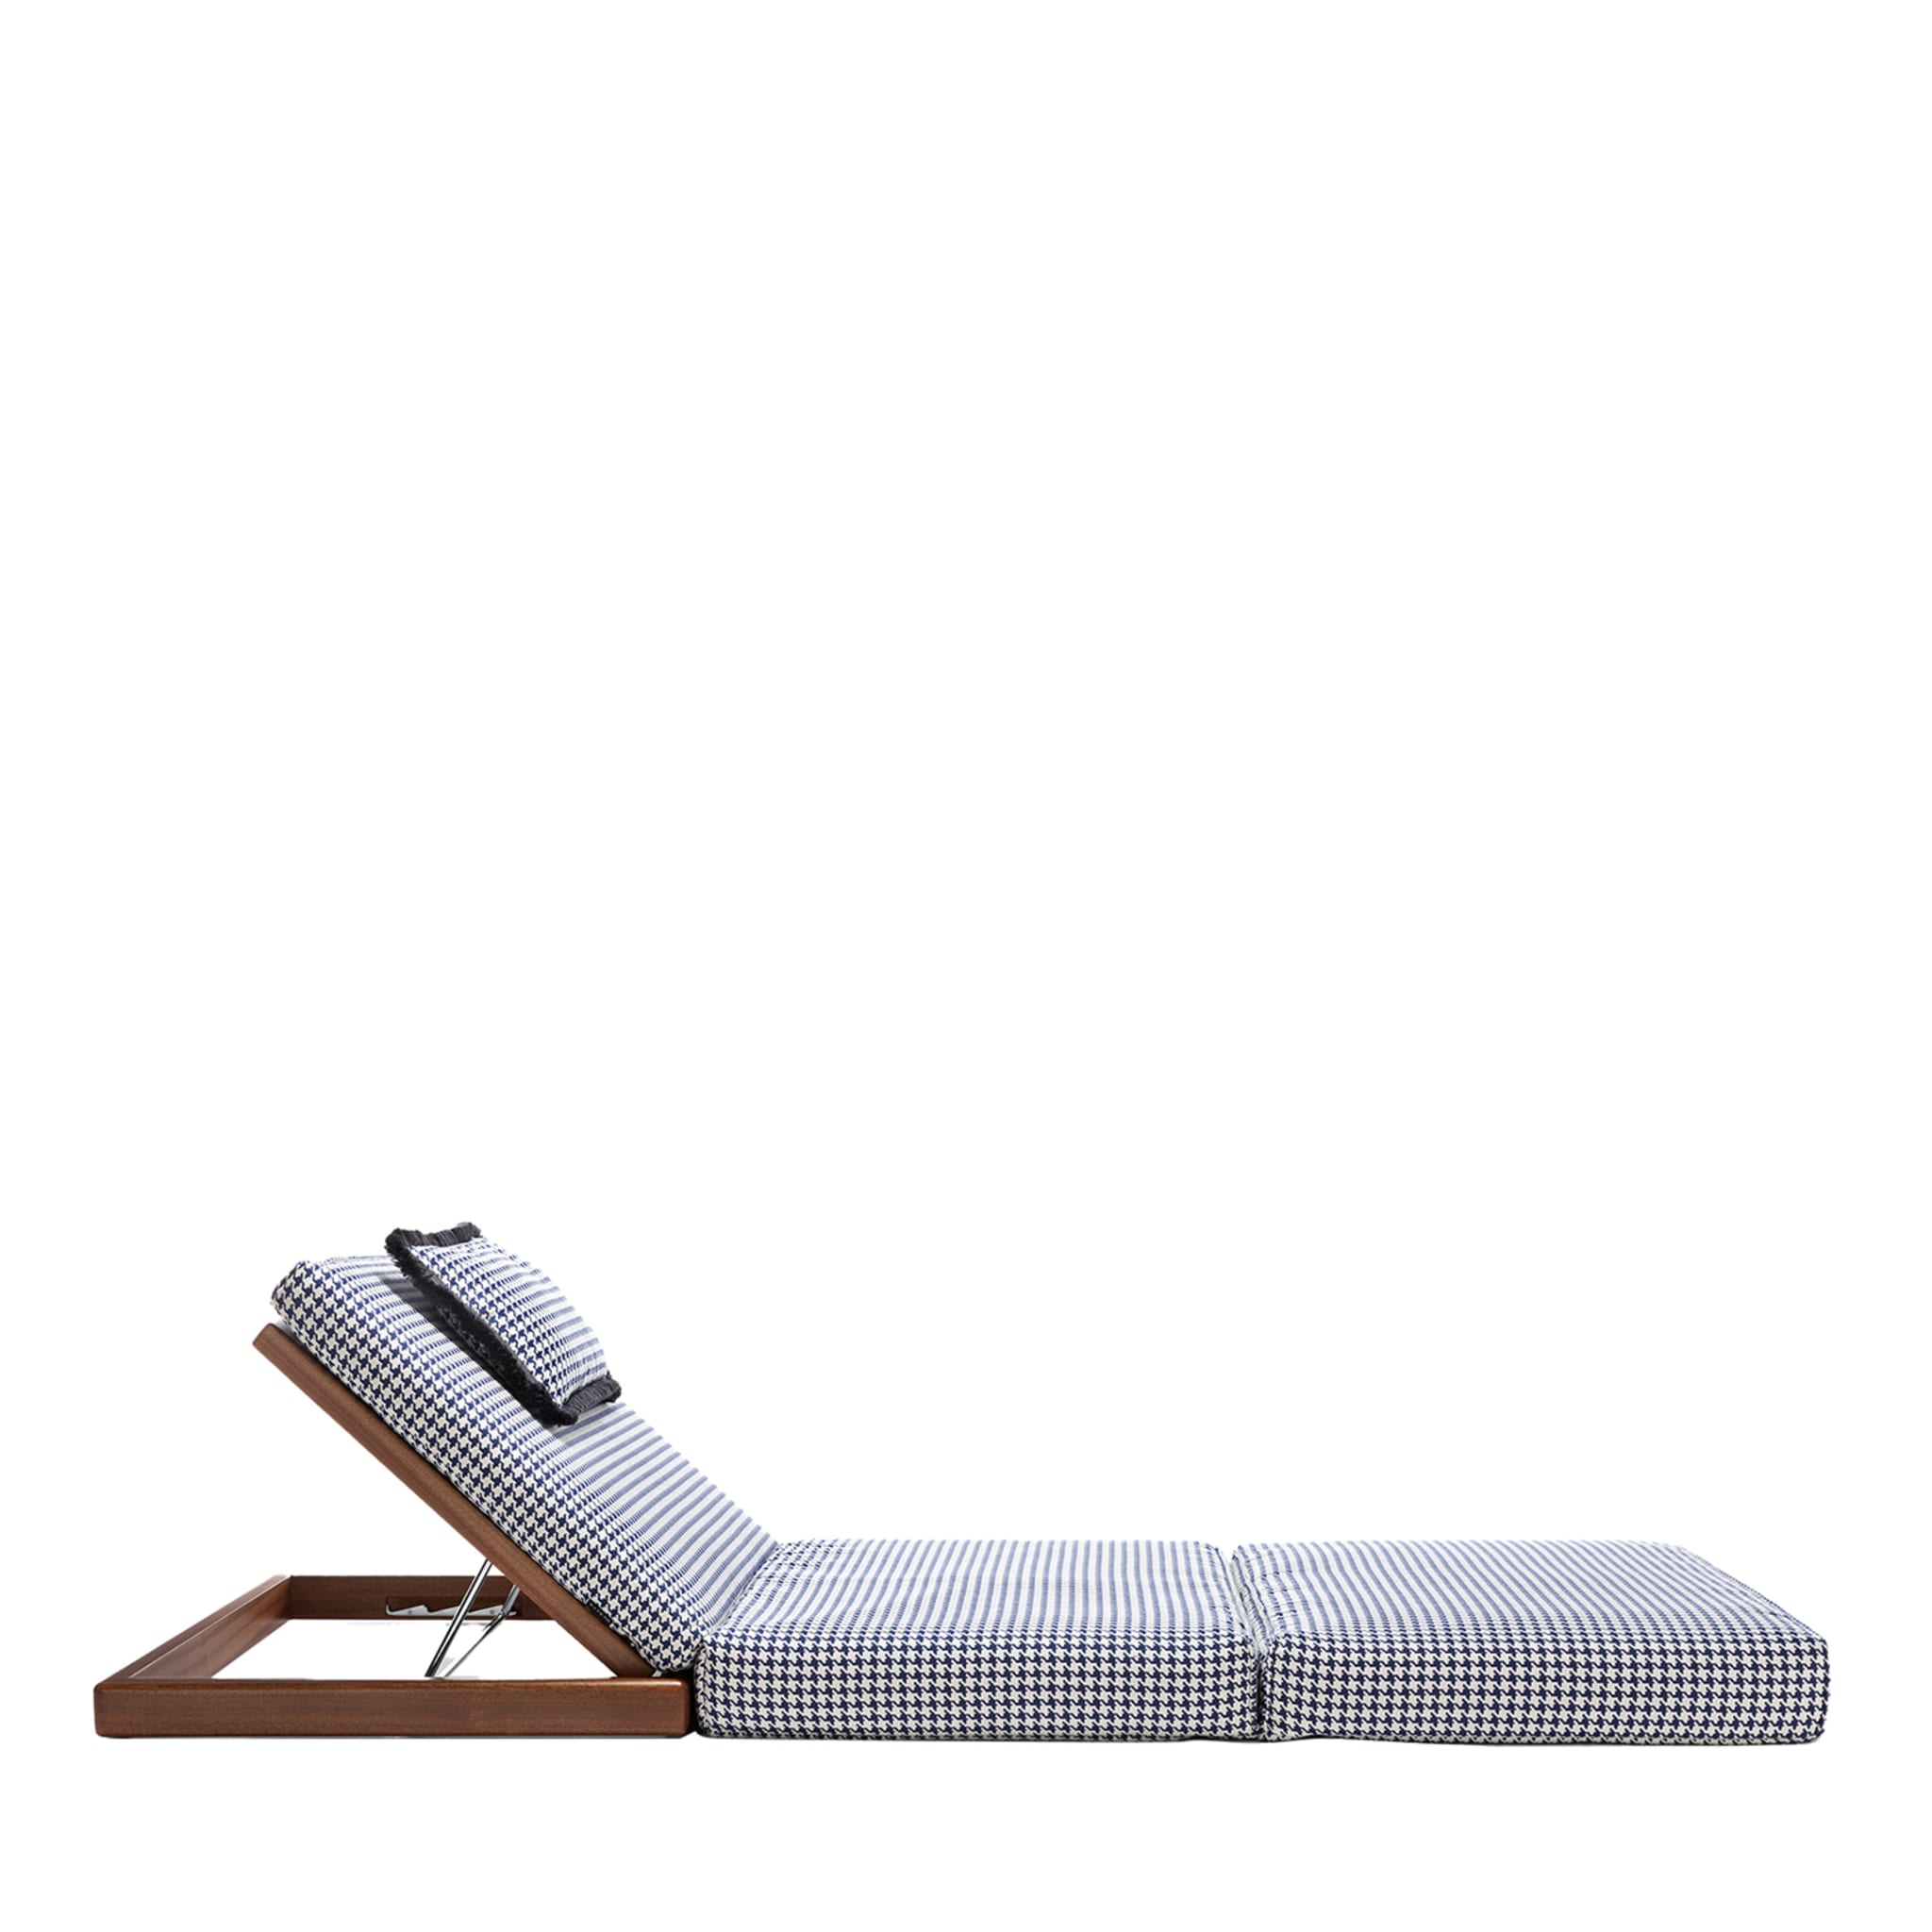 Sunset Poolside Daybed by Paola Navone - Main view